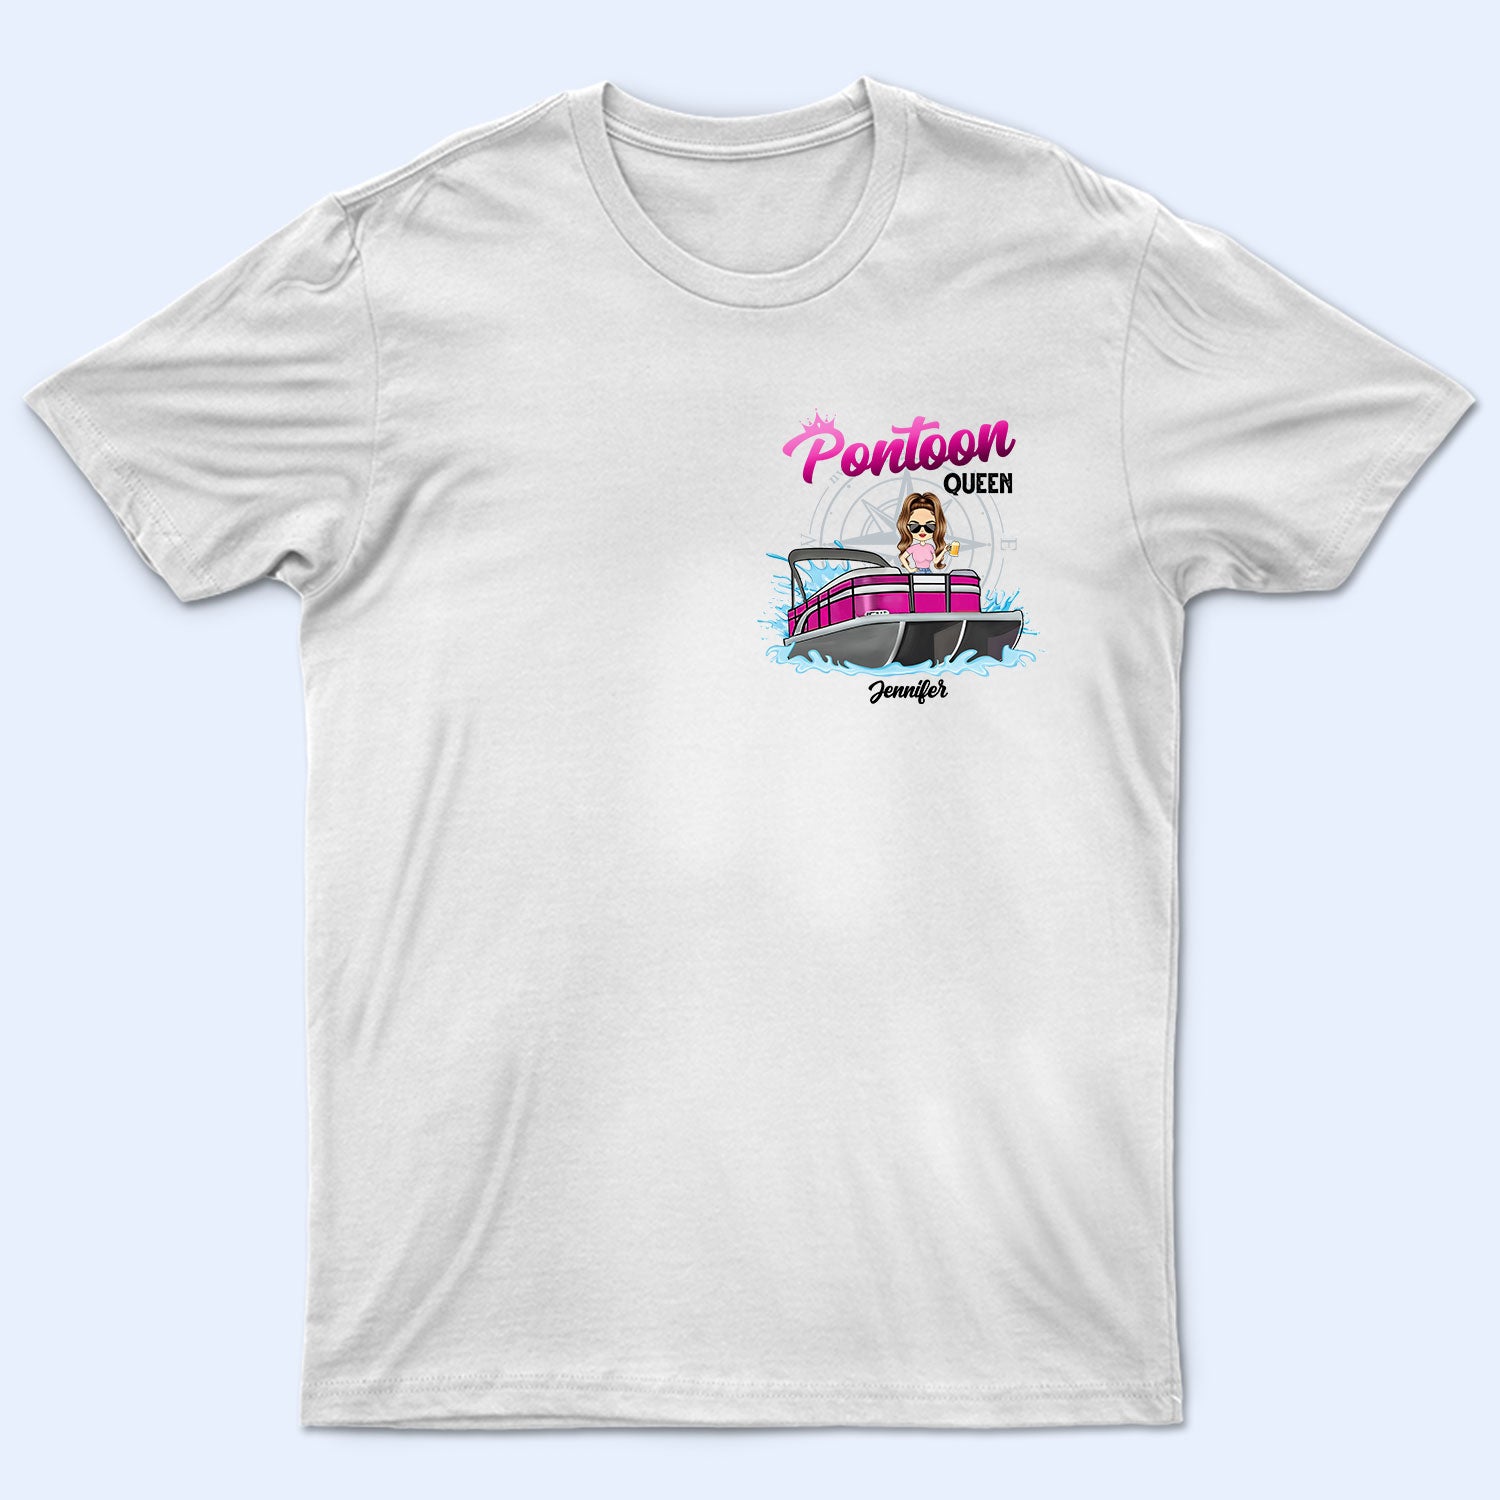 Boating Pontoon Queen - Gift For Pontooning Lovers, Lake Lovers, Travelers, Women - Personalized Custom T Shirt